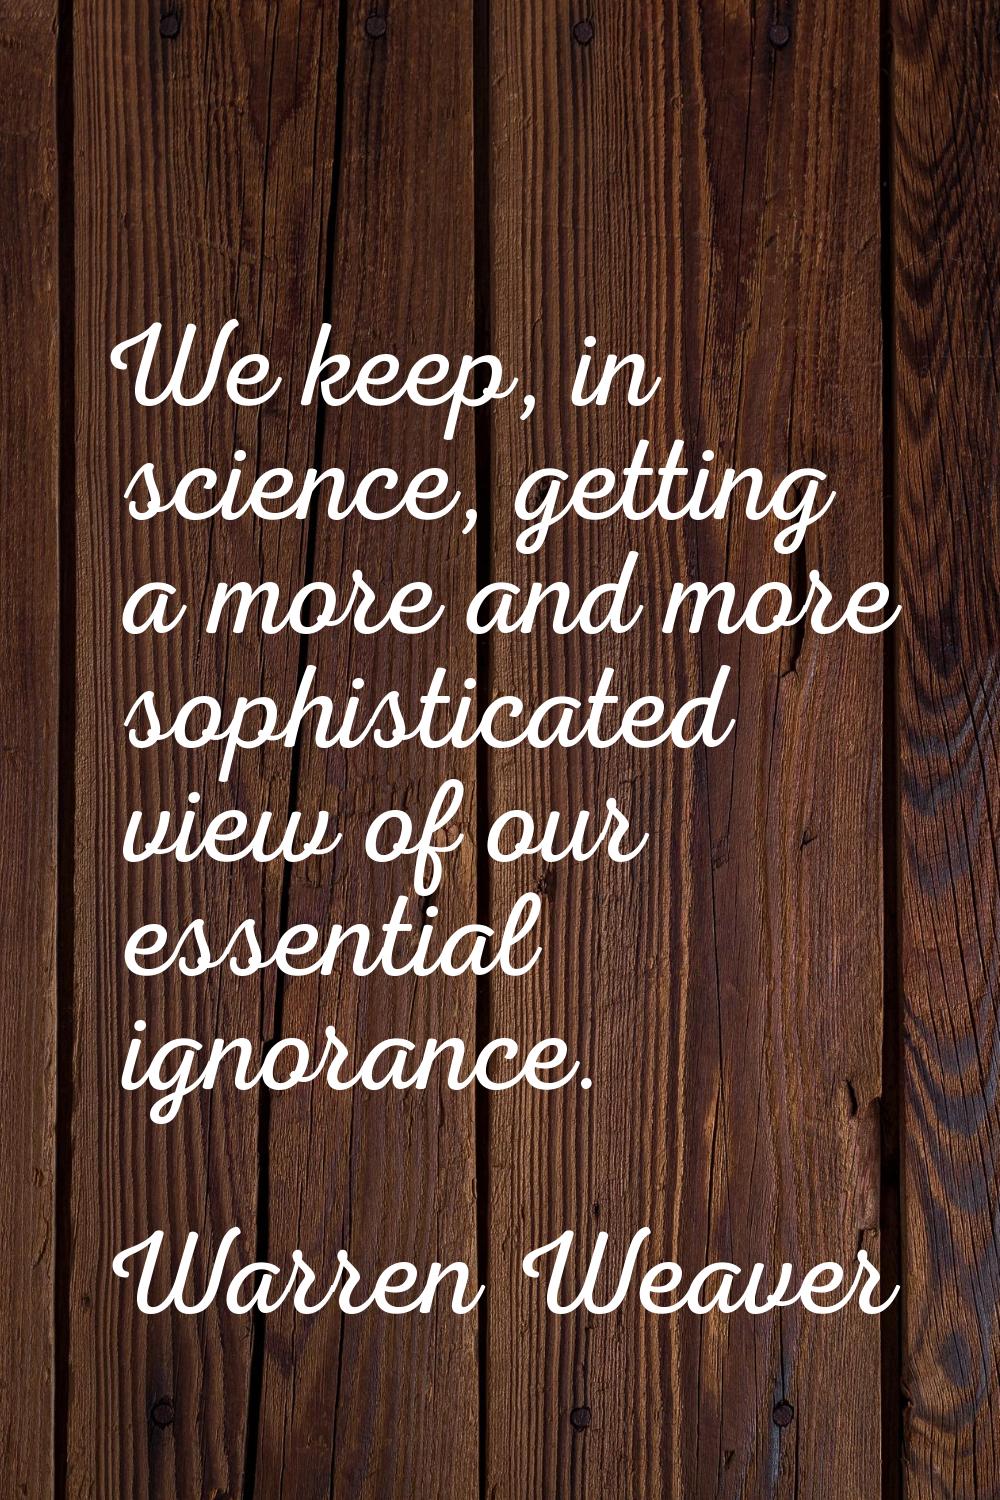 We keep, in science, getting a more and more sophisticated view of our essential ignorance.